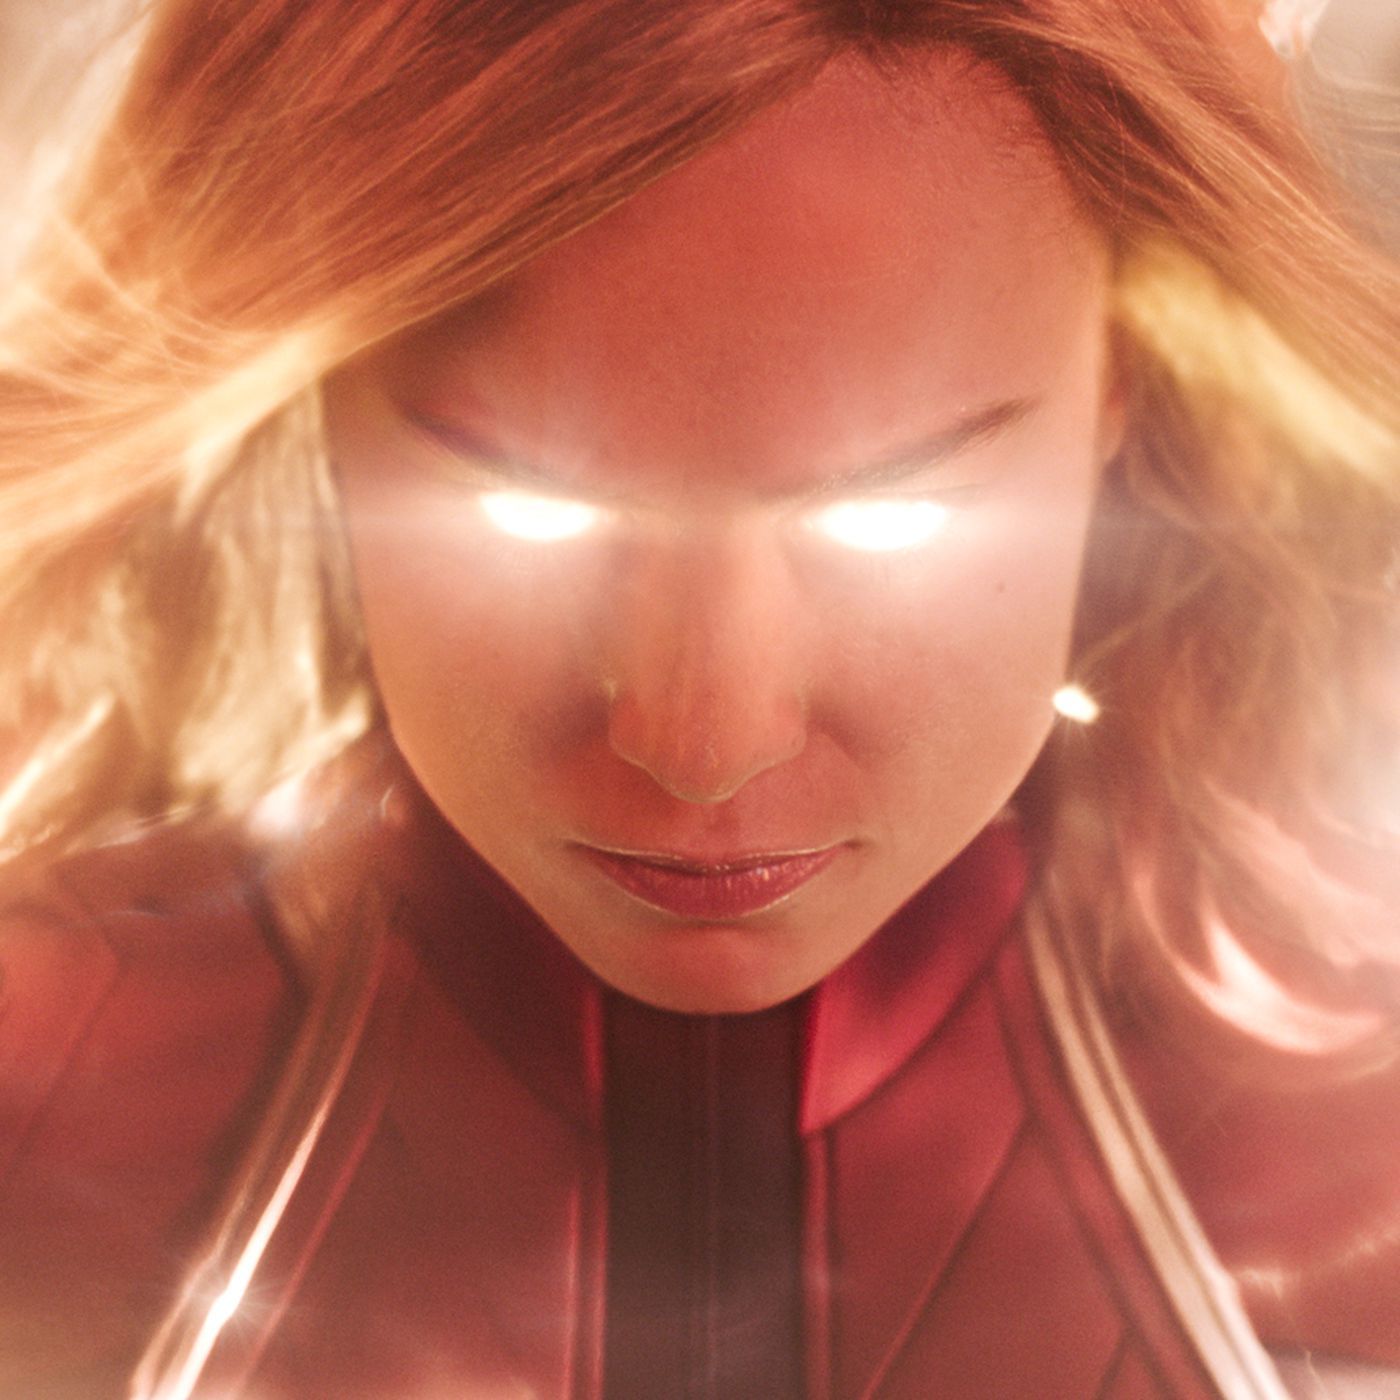 Captain Marvel review: meeting some of the highest expectations